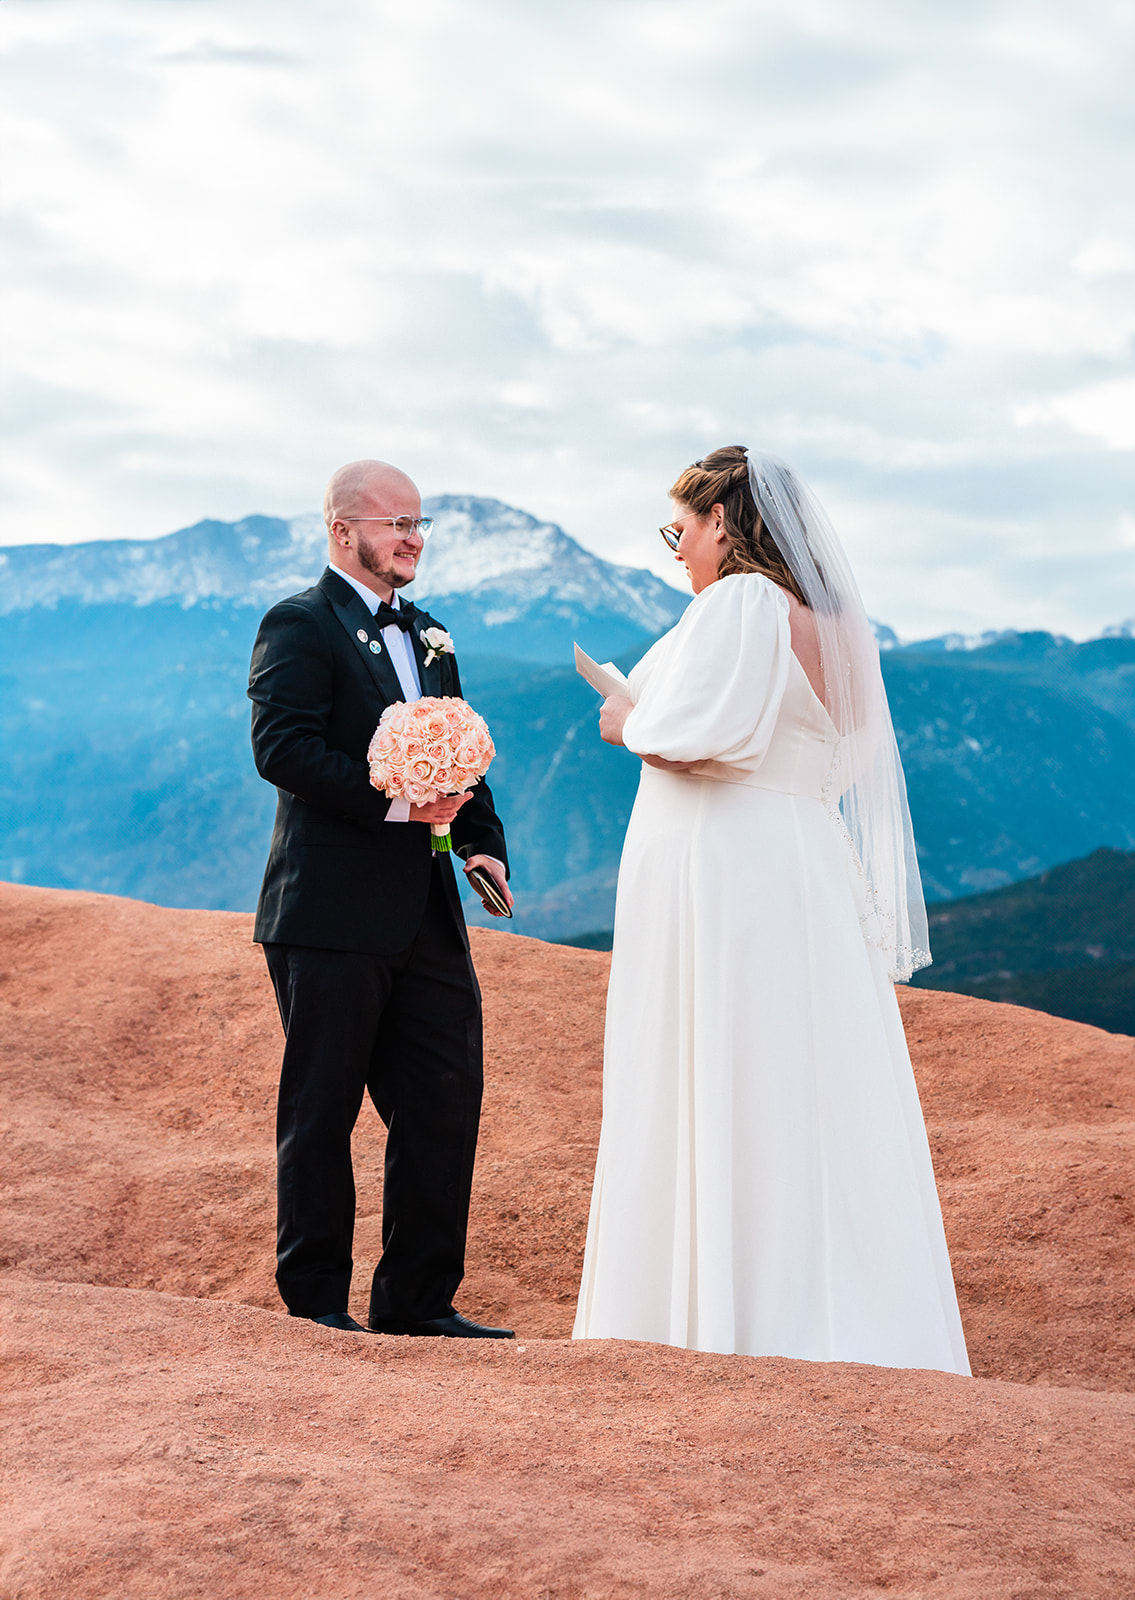 A bride and groom exchanging vows outdoors at High Point in  Garden of the Gods, with a mountainous backdrop, standing on red earth. The groom is bald, and both are smiling, holding hands.